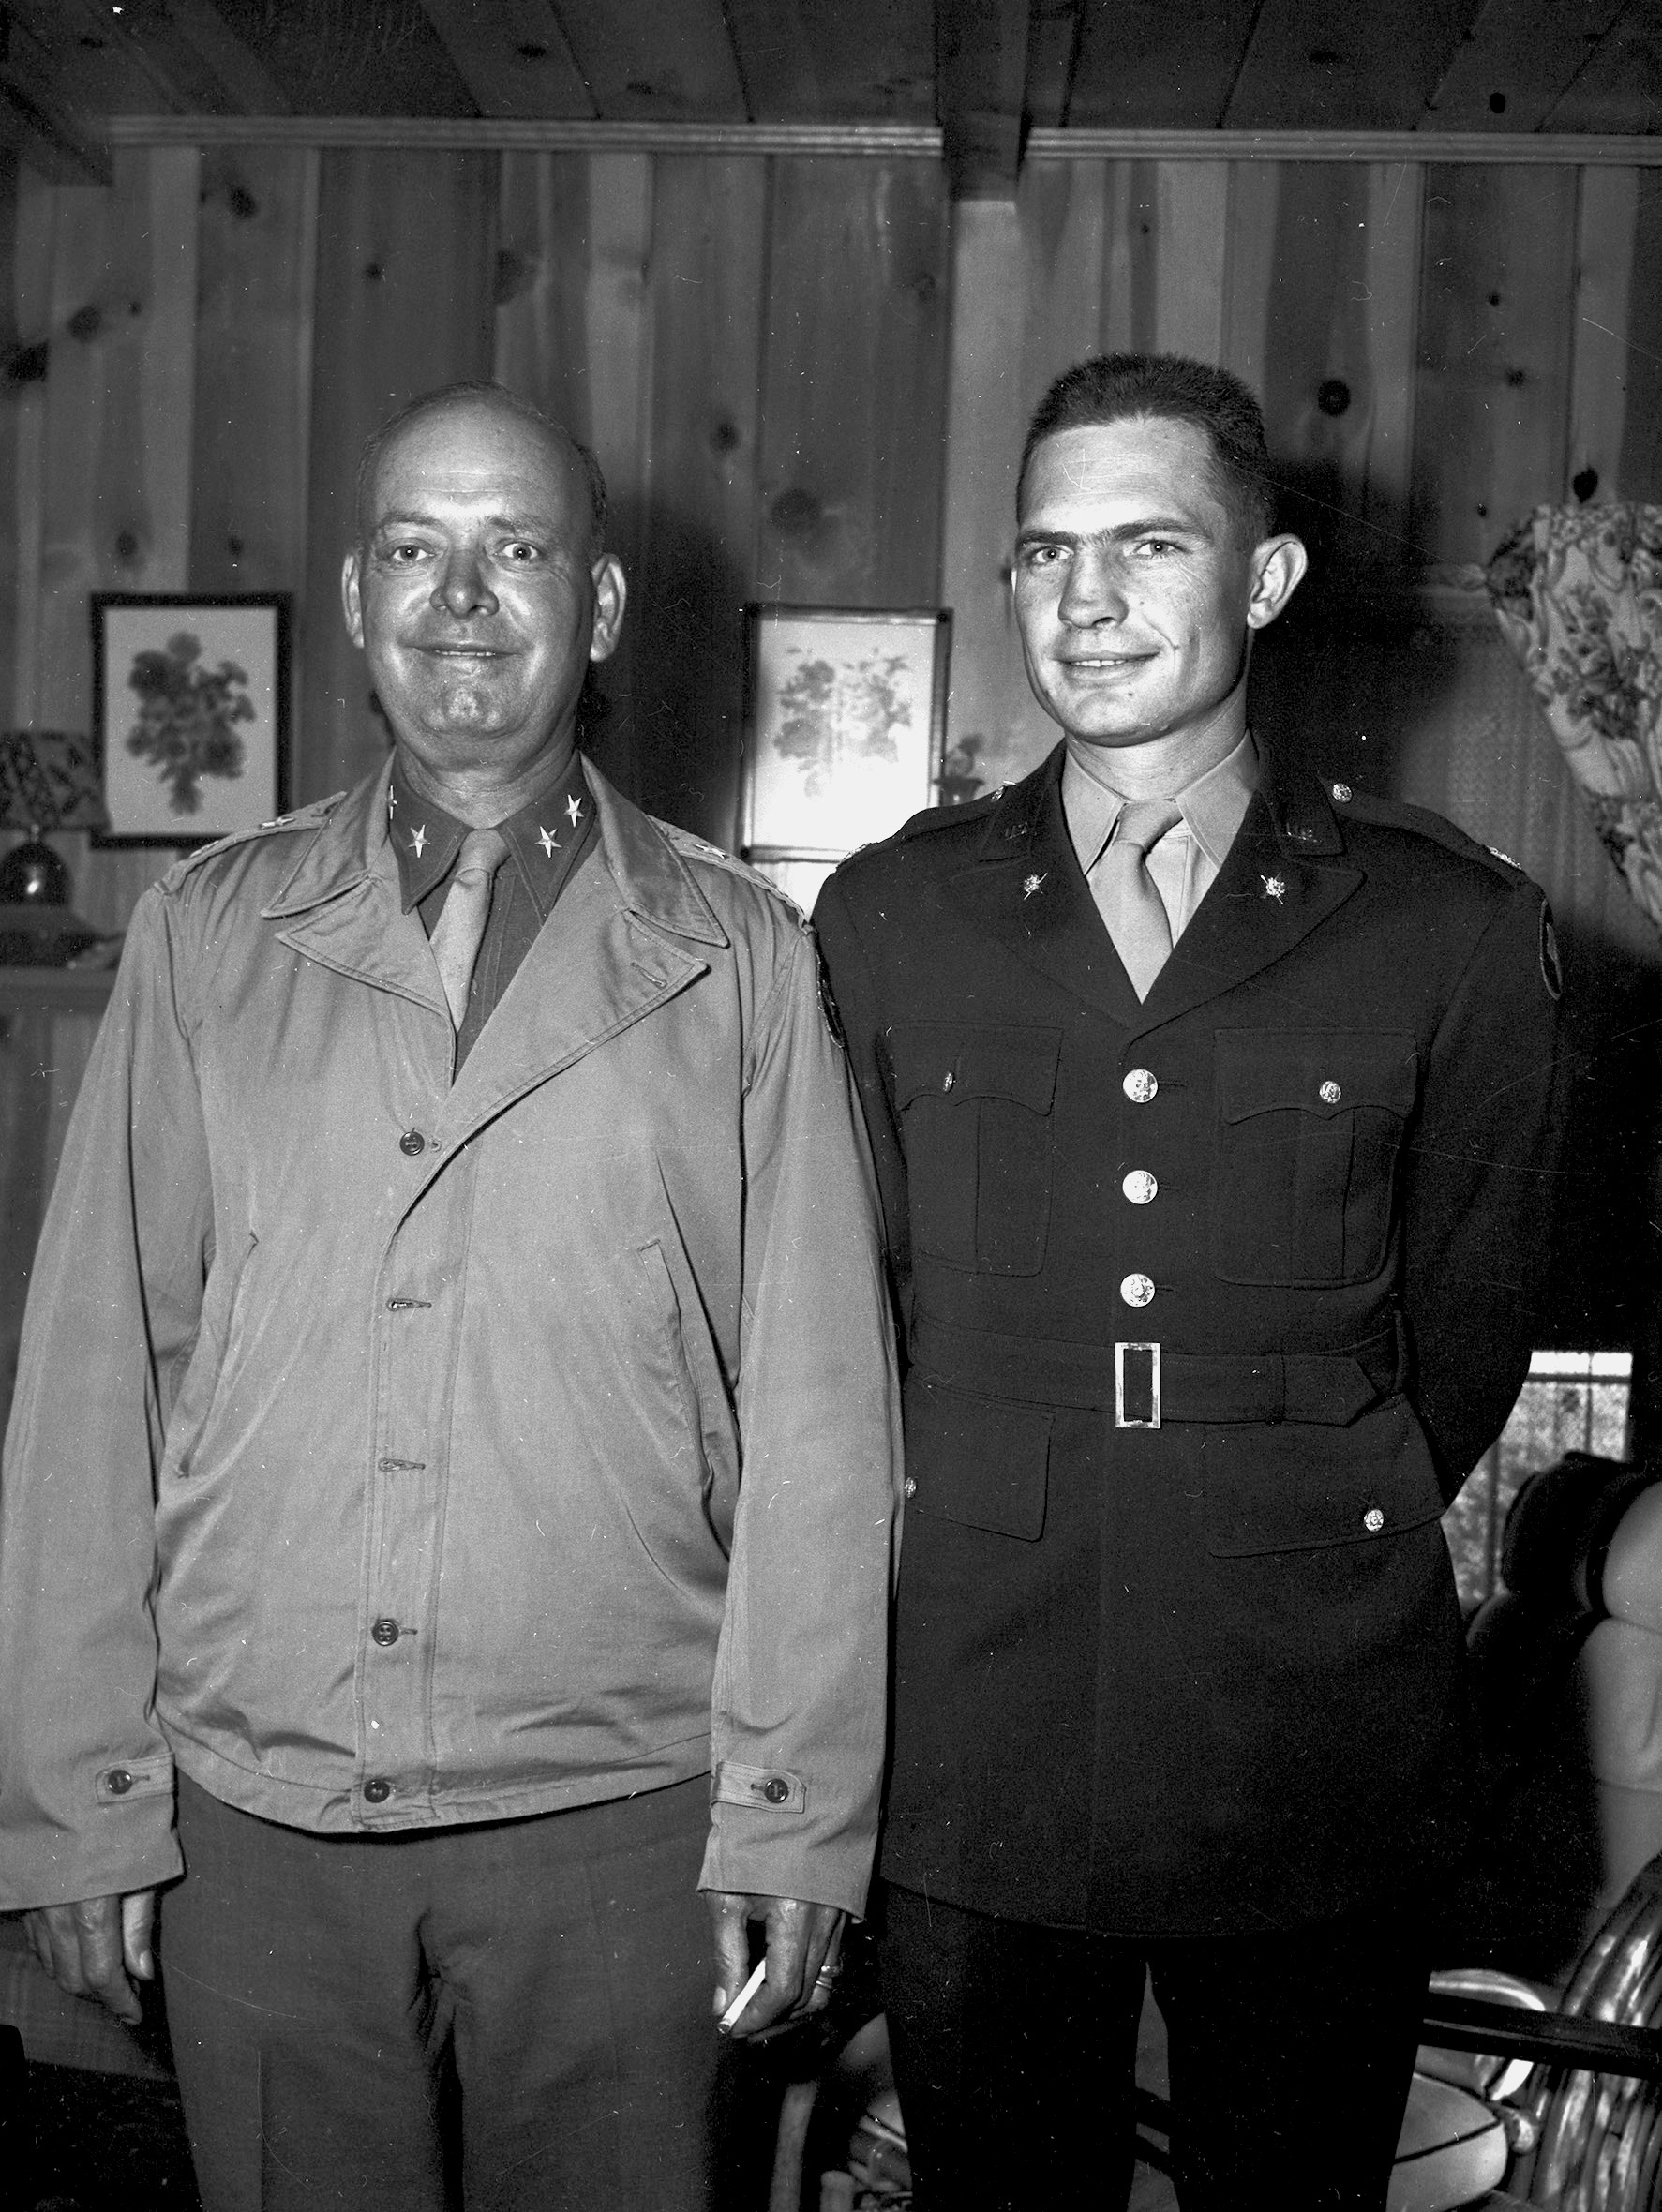 Major General Gilbert R. Cook, left and Major William Boydstun, right. Both are wearing WWII military uniforms of their rank.